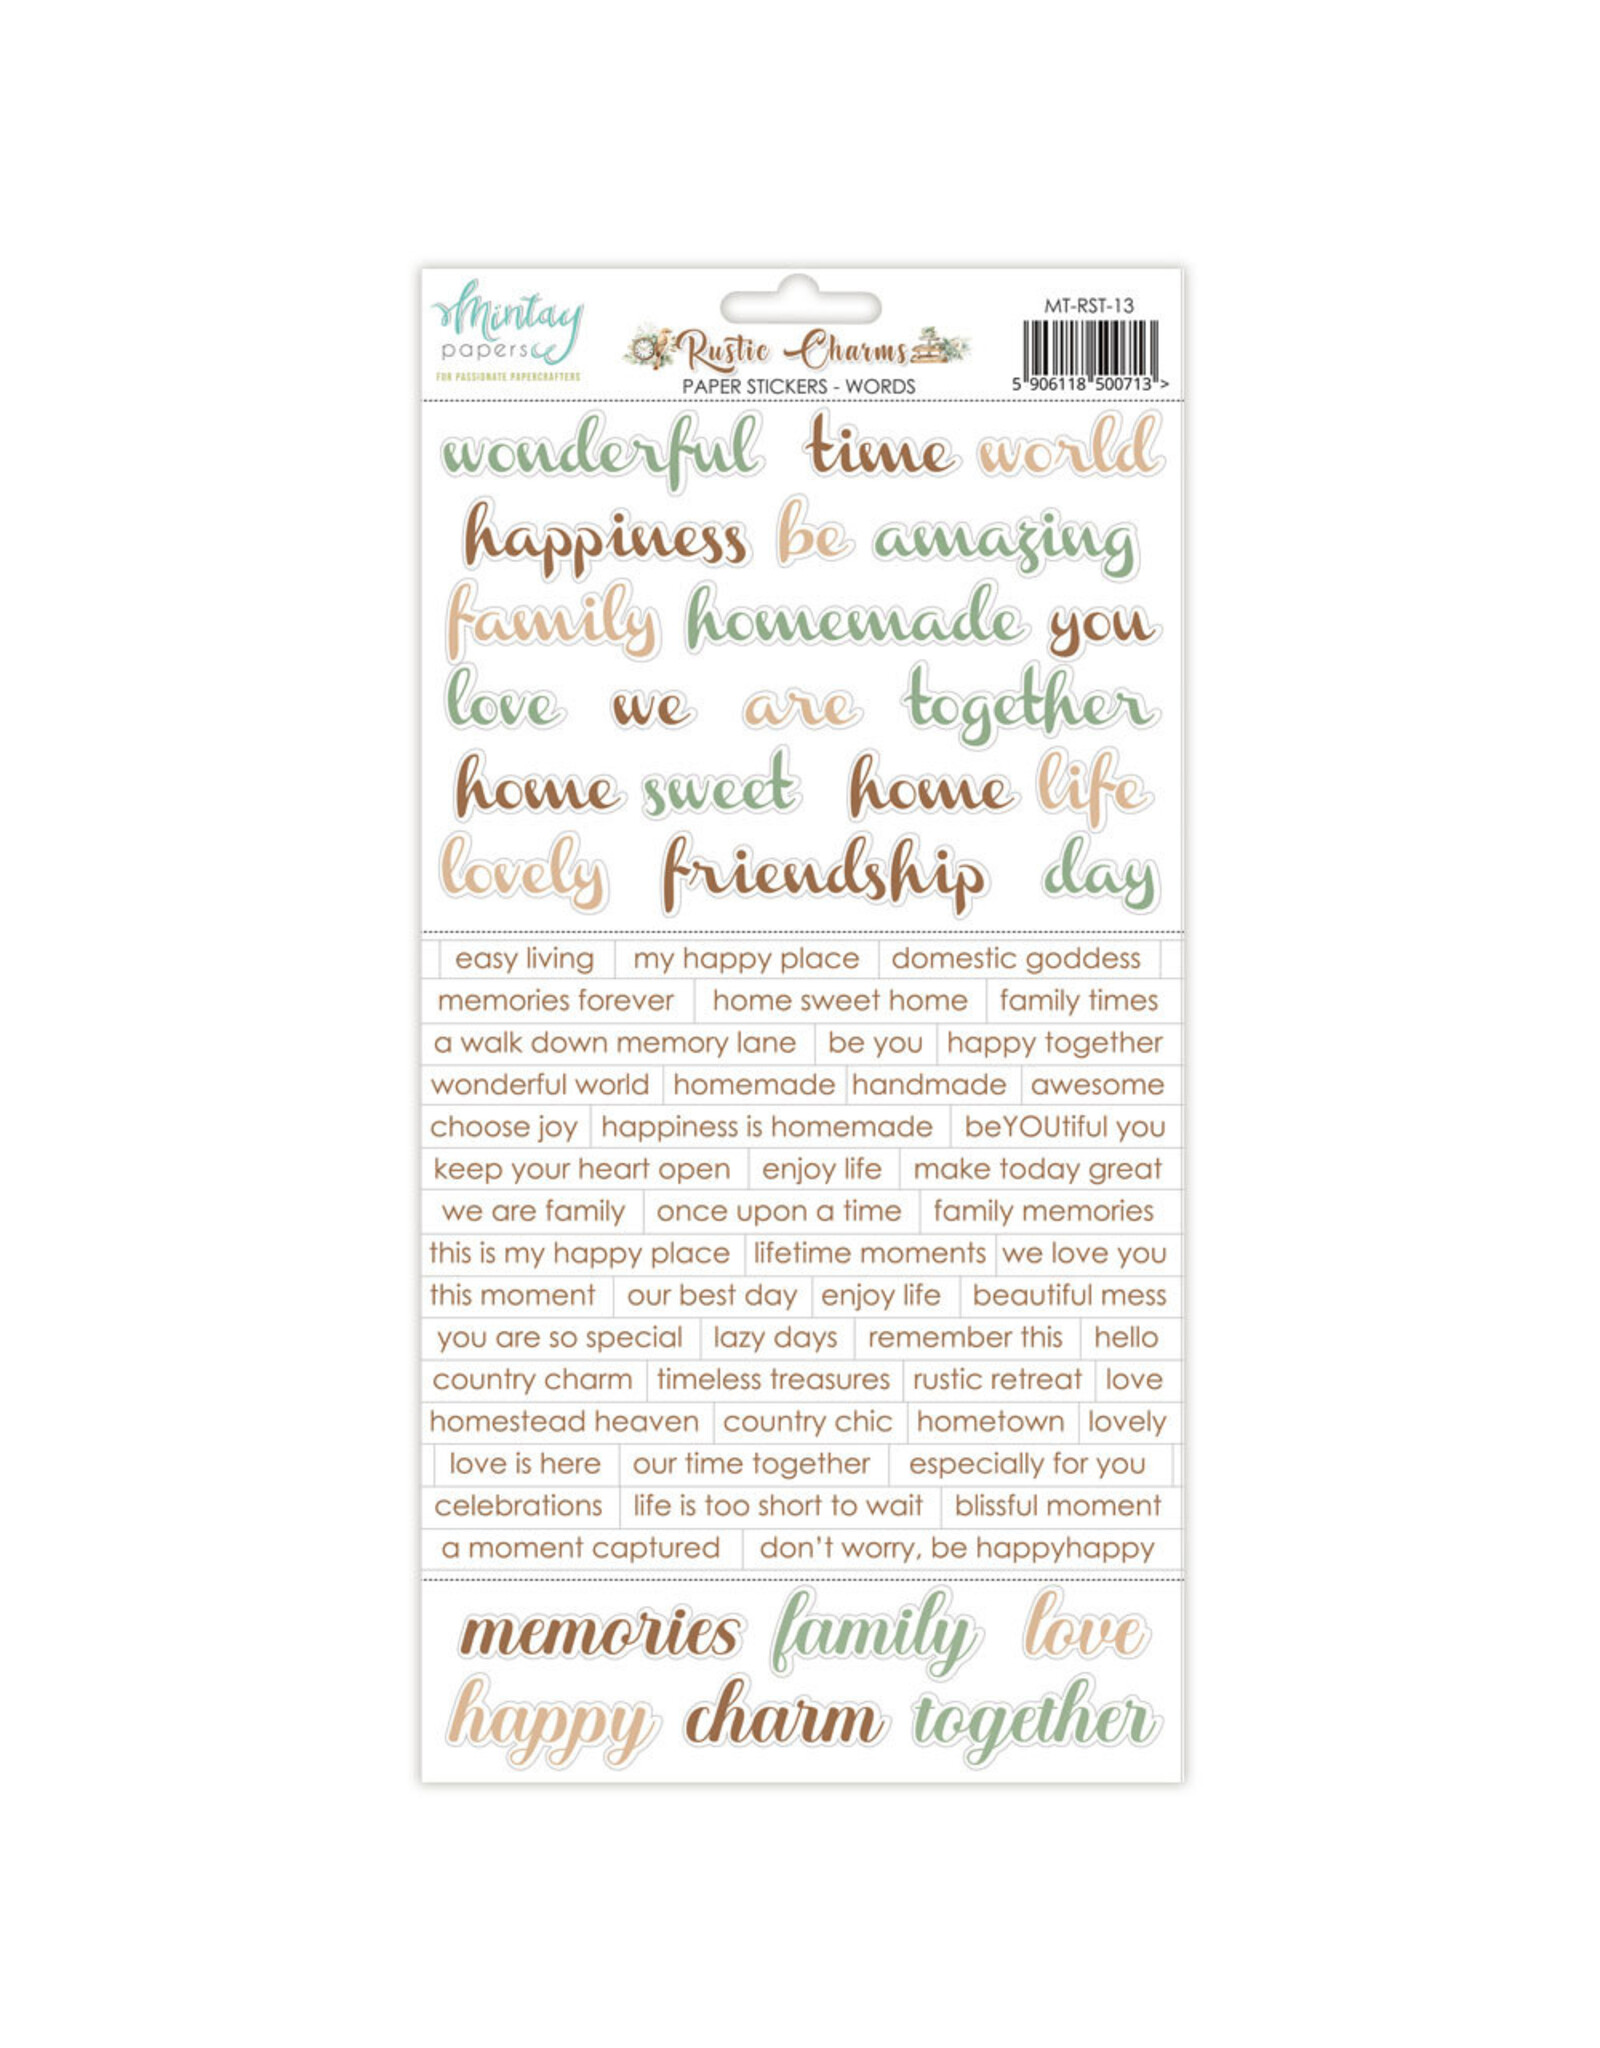 MINTAY MINTAY RUSTIC CHARMS 6x12 PAPER STICKERS - WORDS